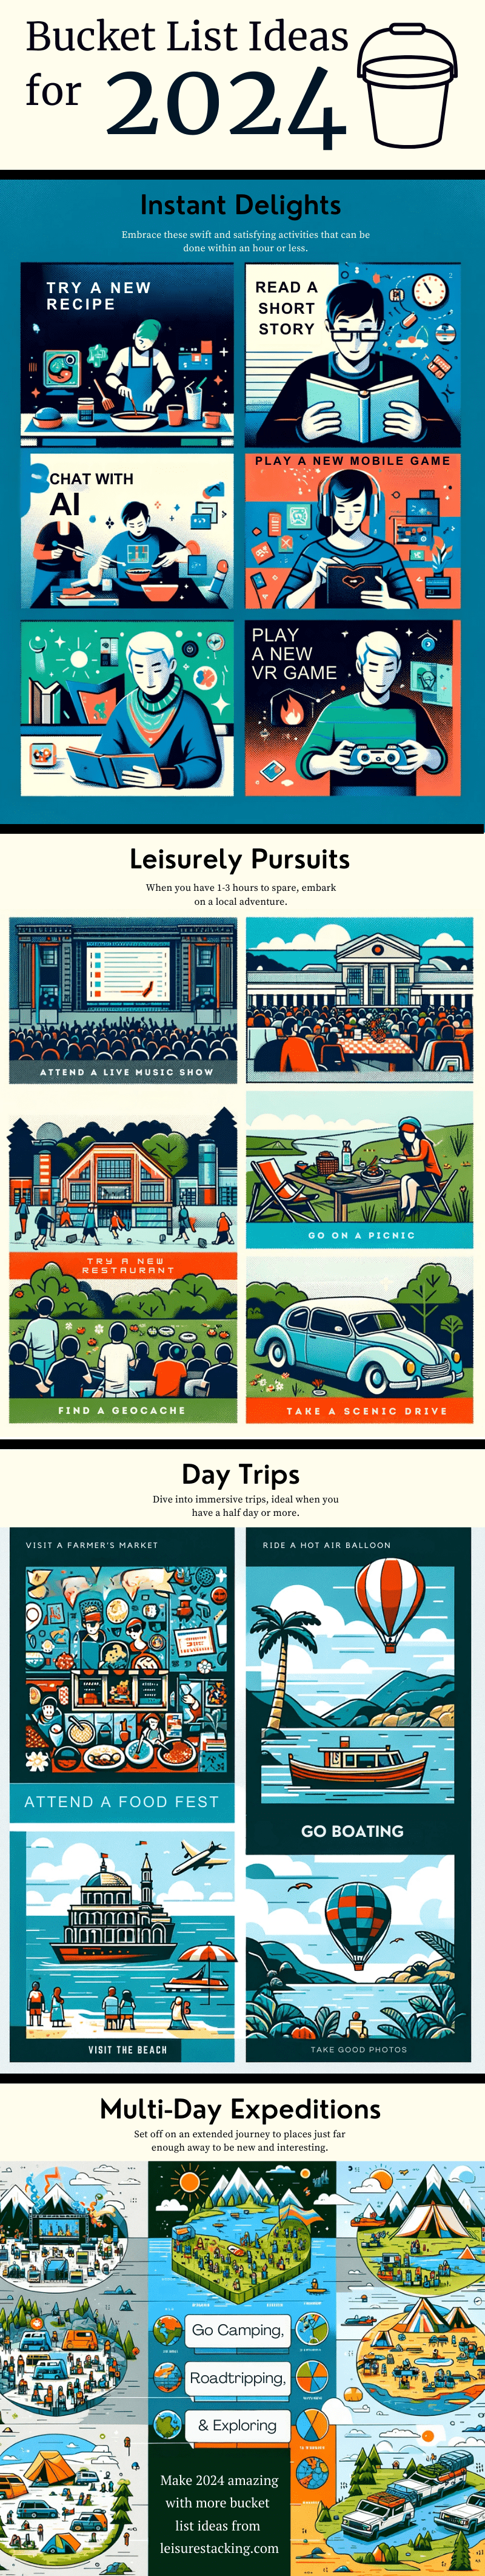 An infographic featuring people pursing bucket list ideas ranging from the simple, such as trying a new recipe, to the adverturous, such as taking a road trip.